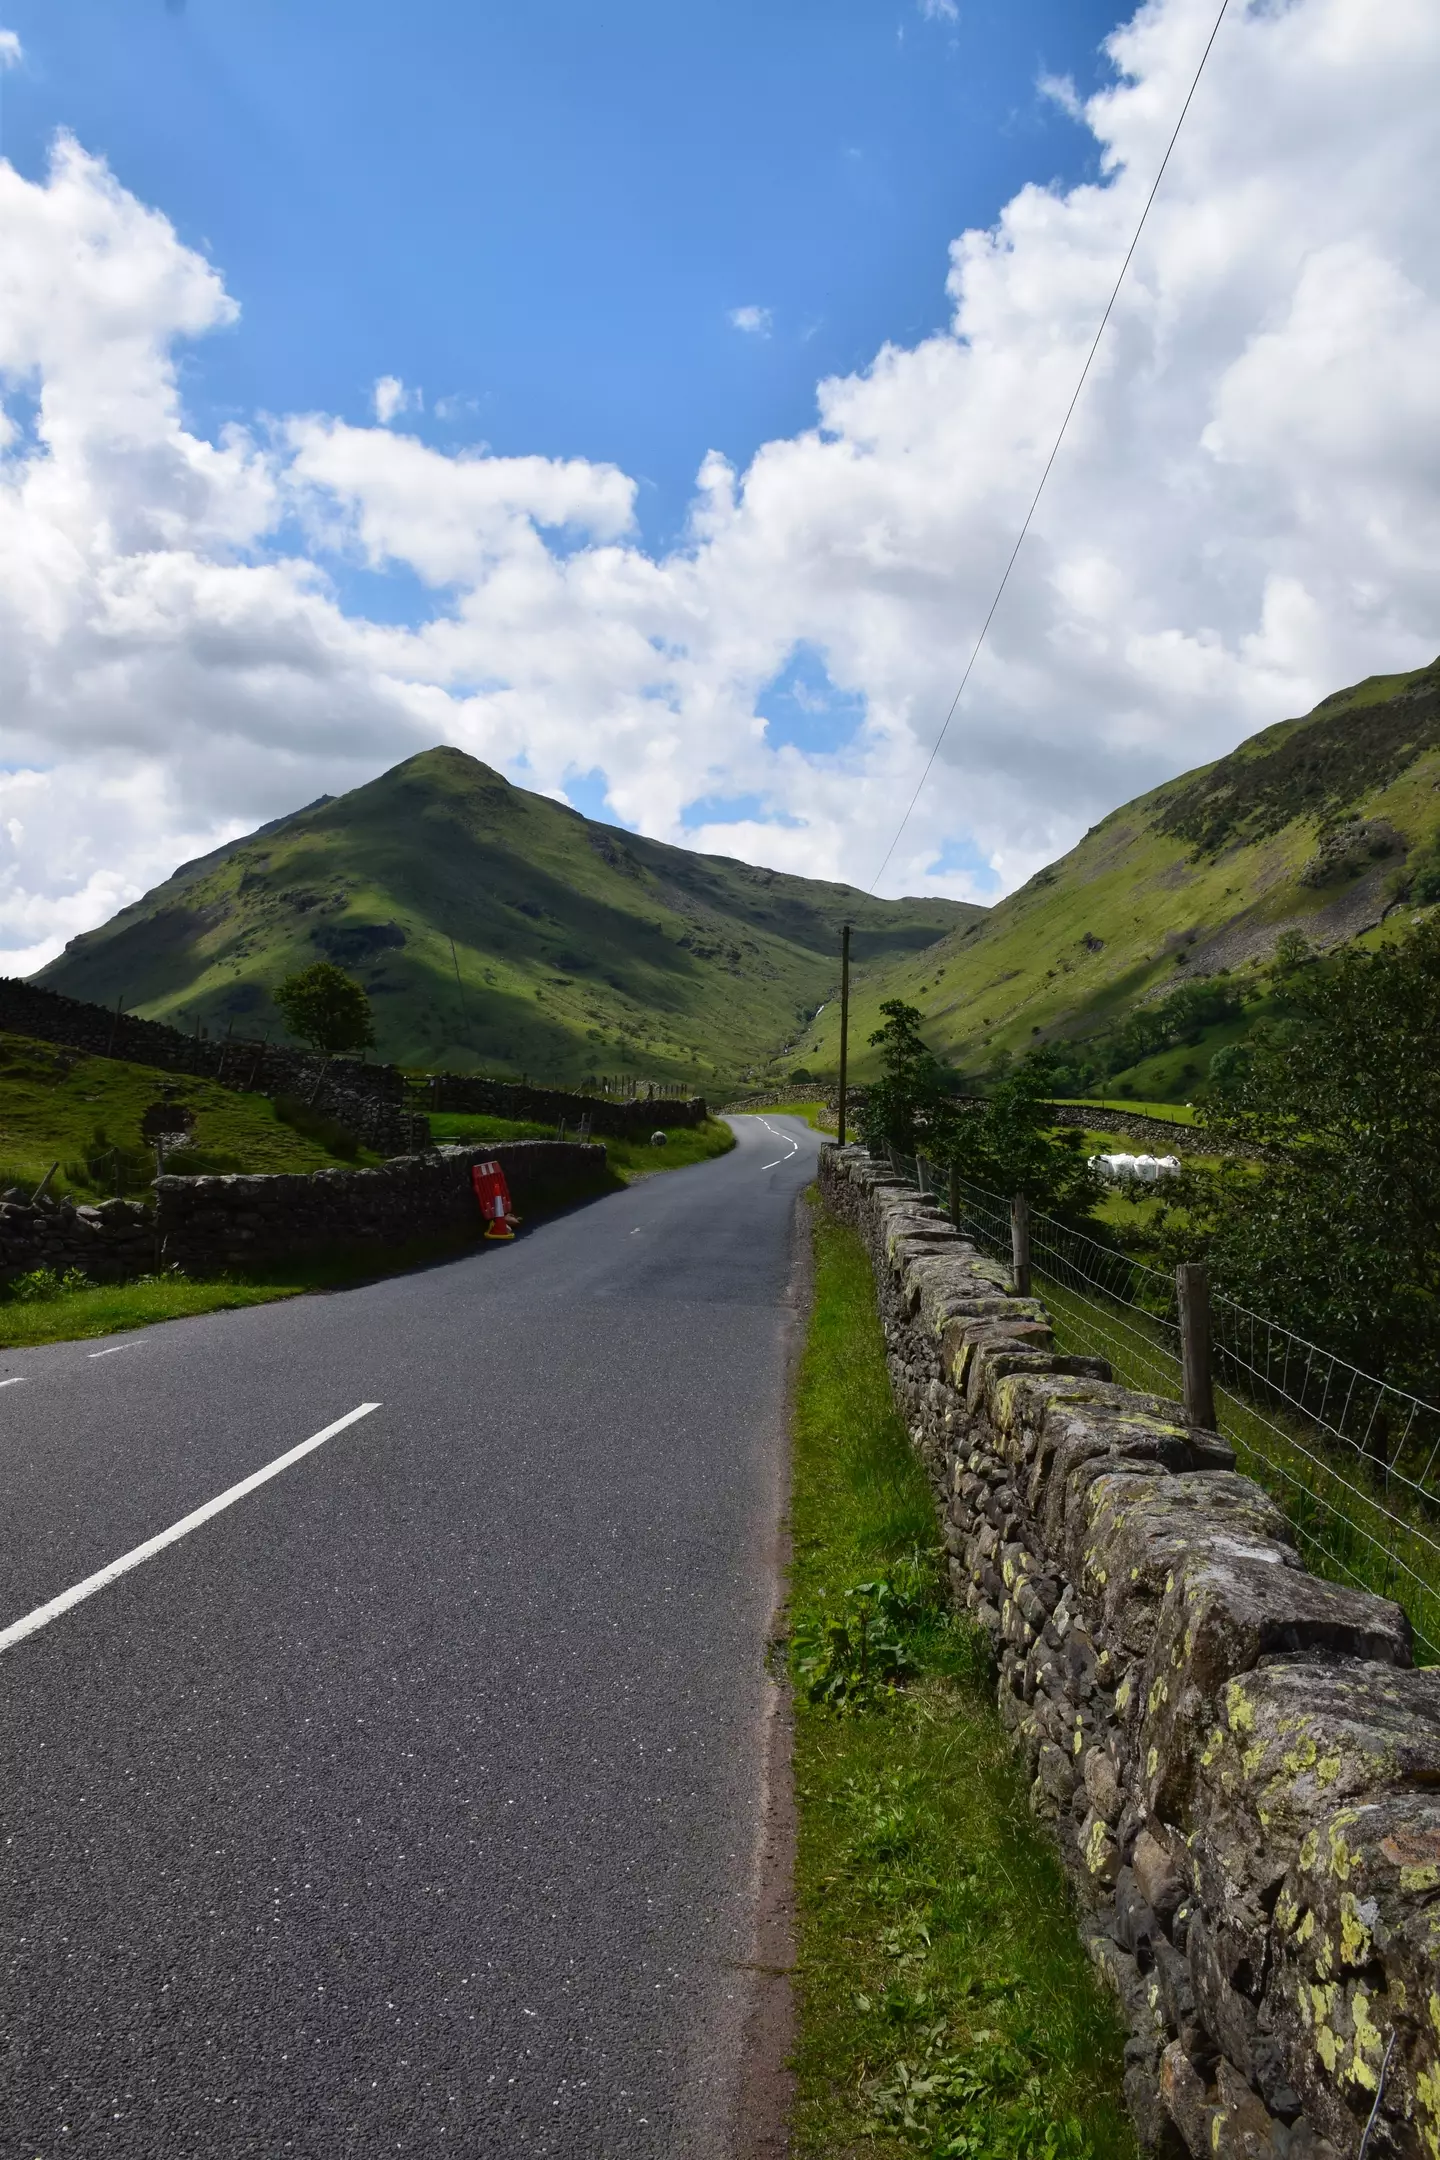 Named as one of the most dangerous roads in the UK, the Kirkstone Pass is said to have a dark past.